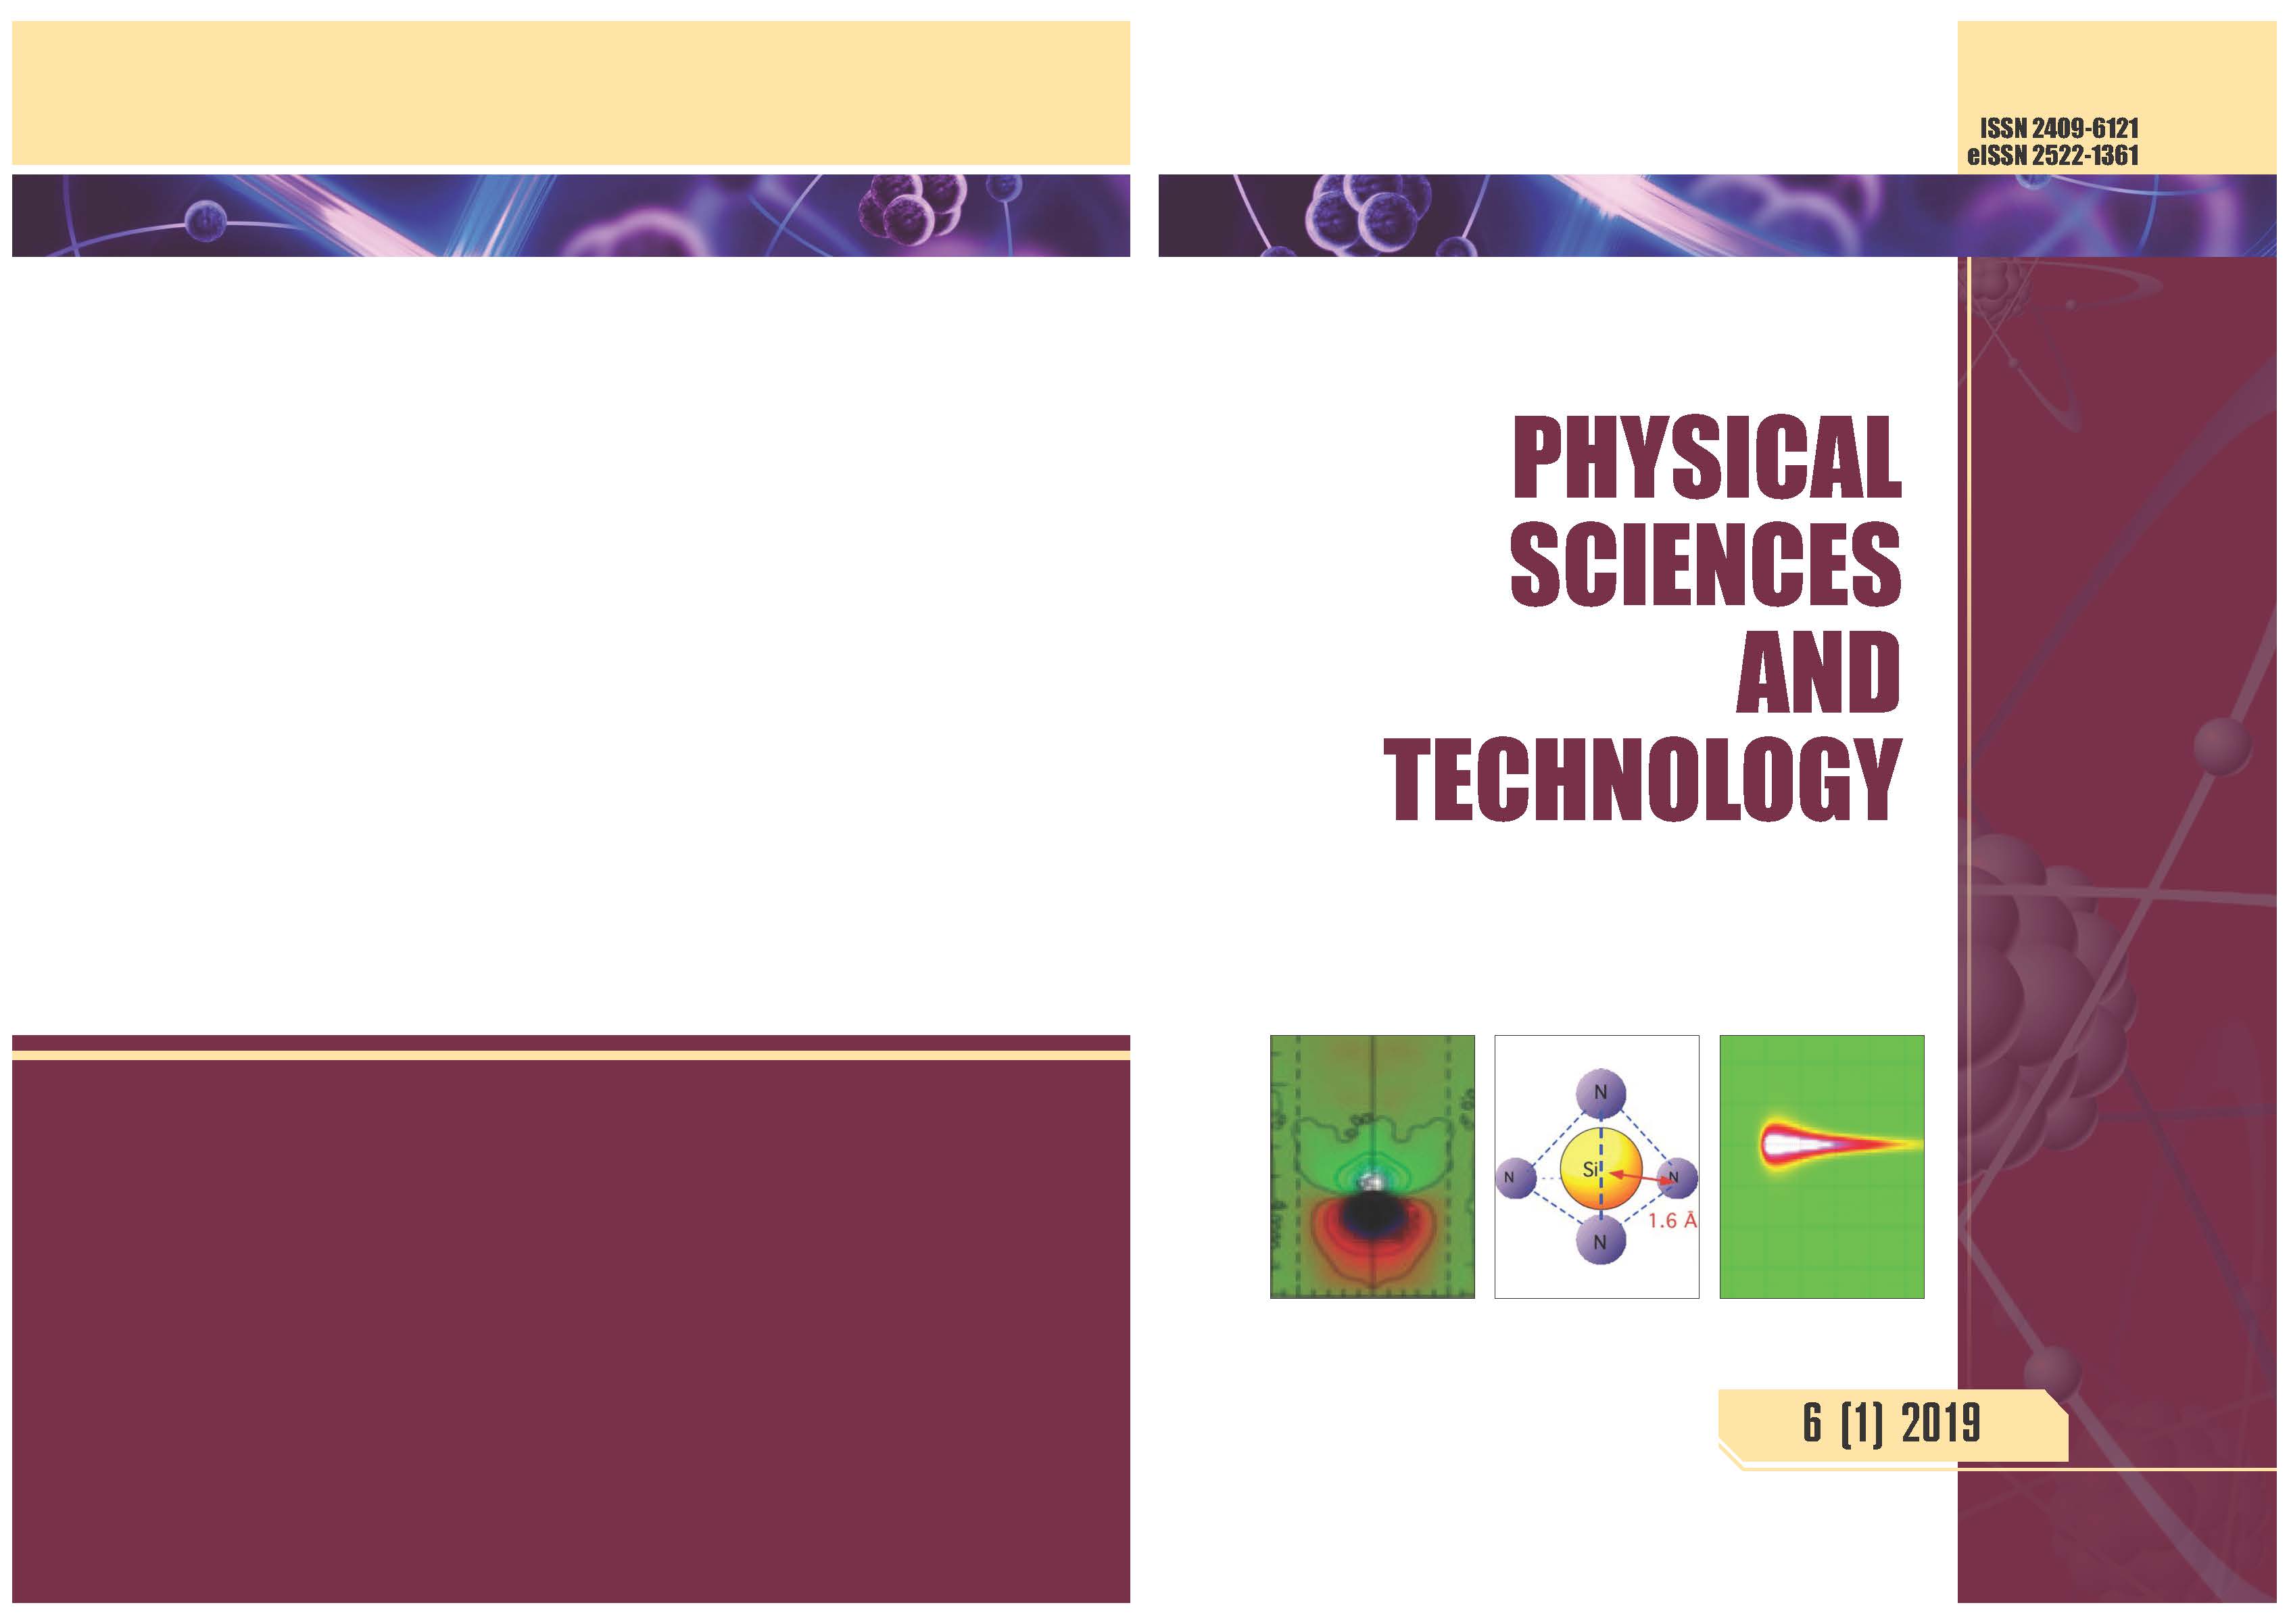 					View Vol. 6 No. 1-2 (2019): PHYSICAL SCIENCES AND TECHNOLOGY
				